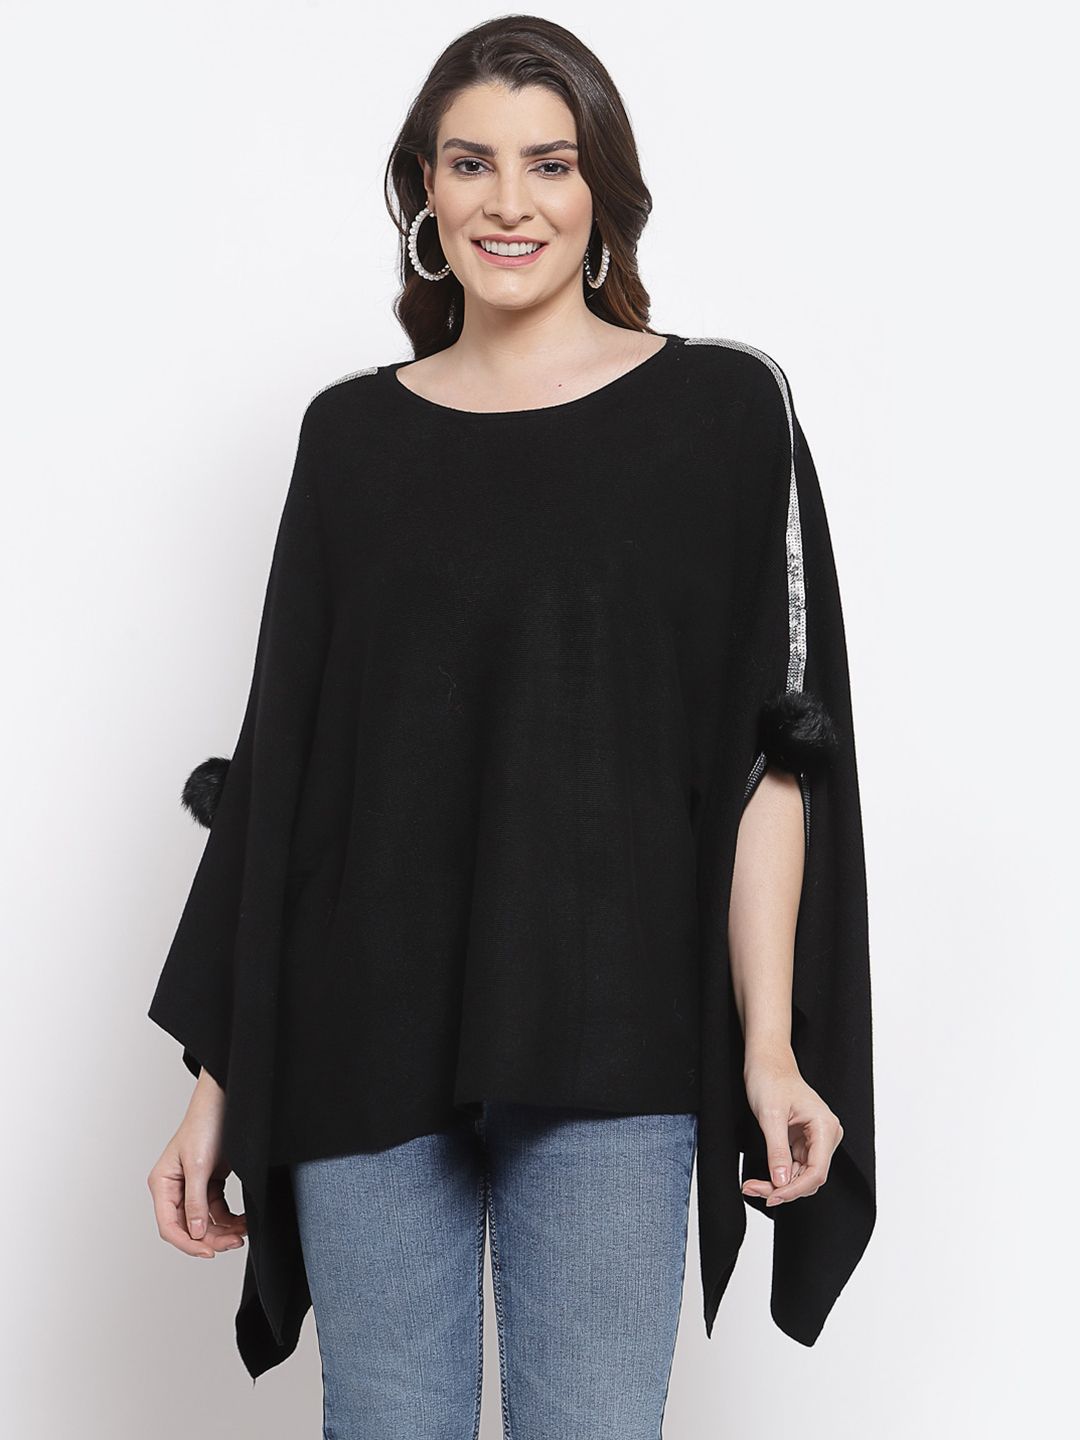 Mafadeny Women Black & Silver-Toned Poncho with Embellished Detail Price in India